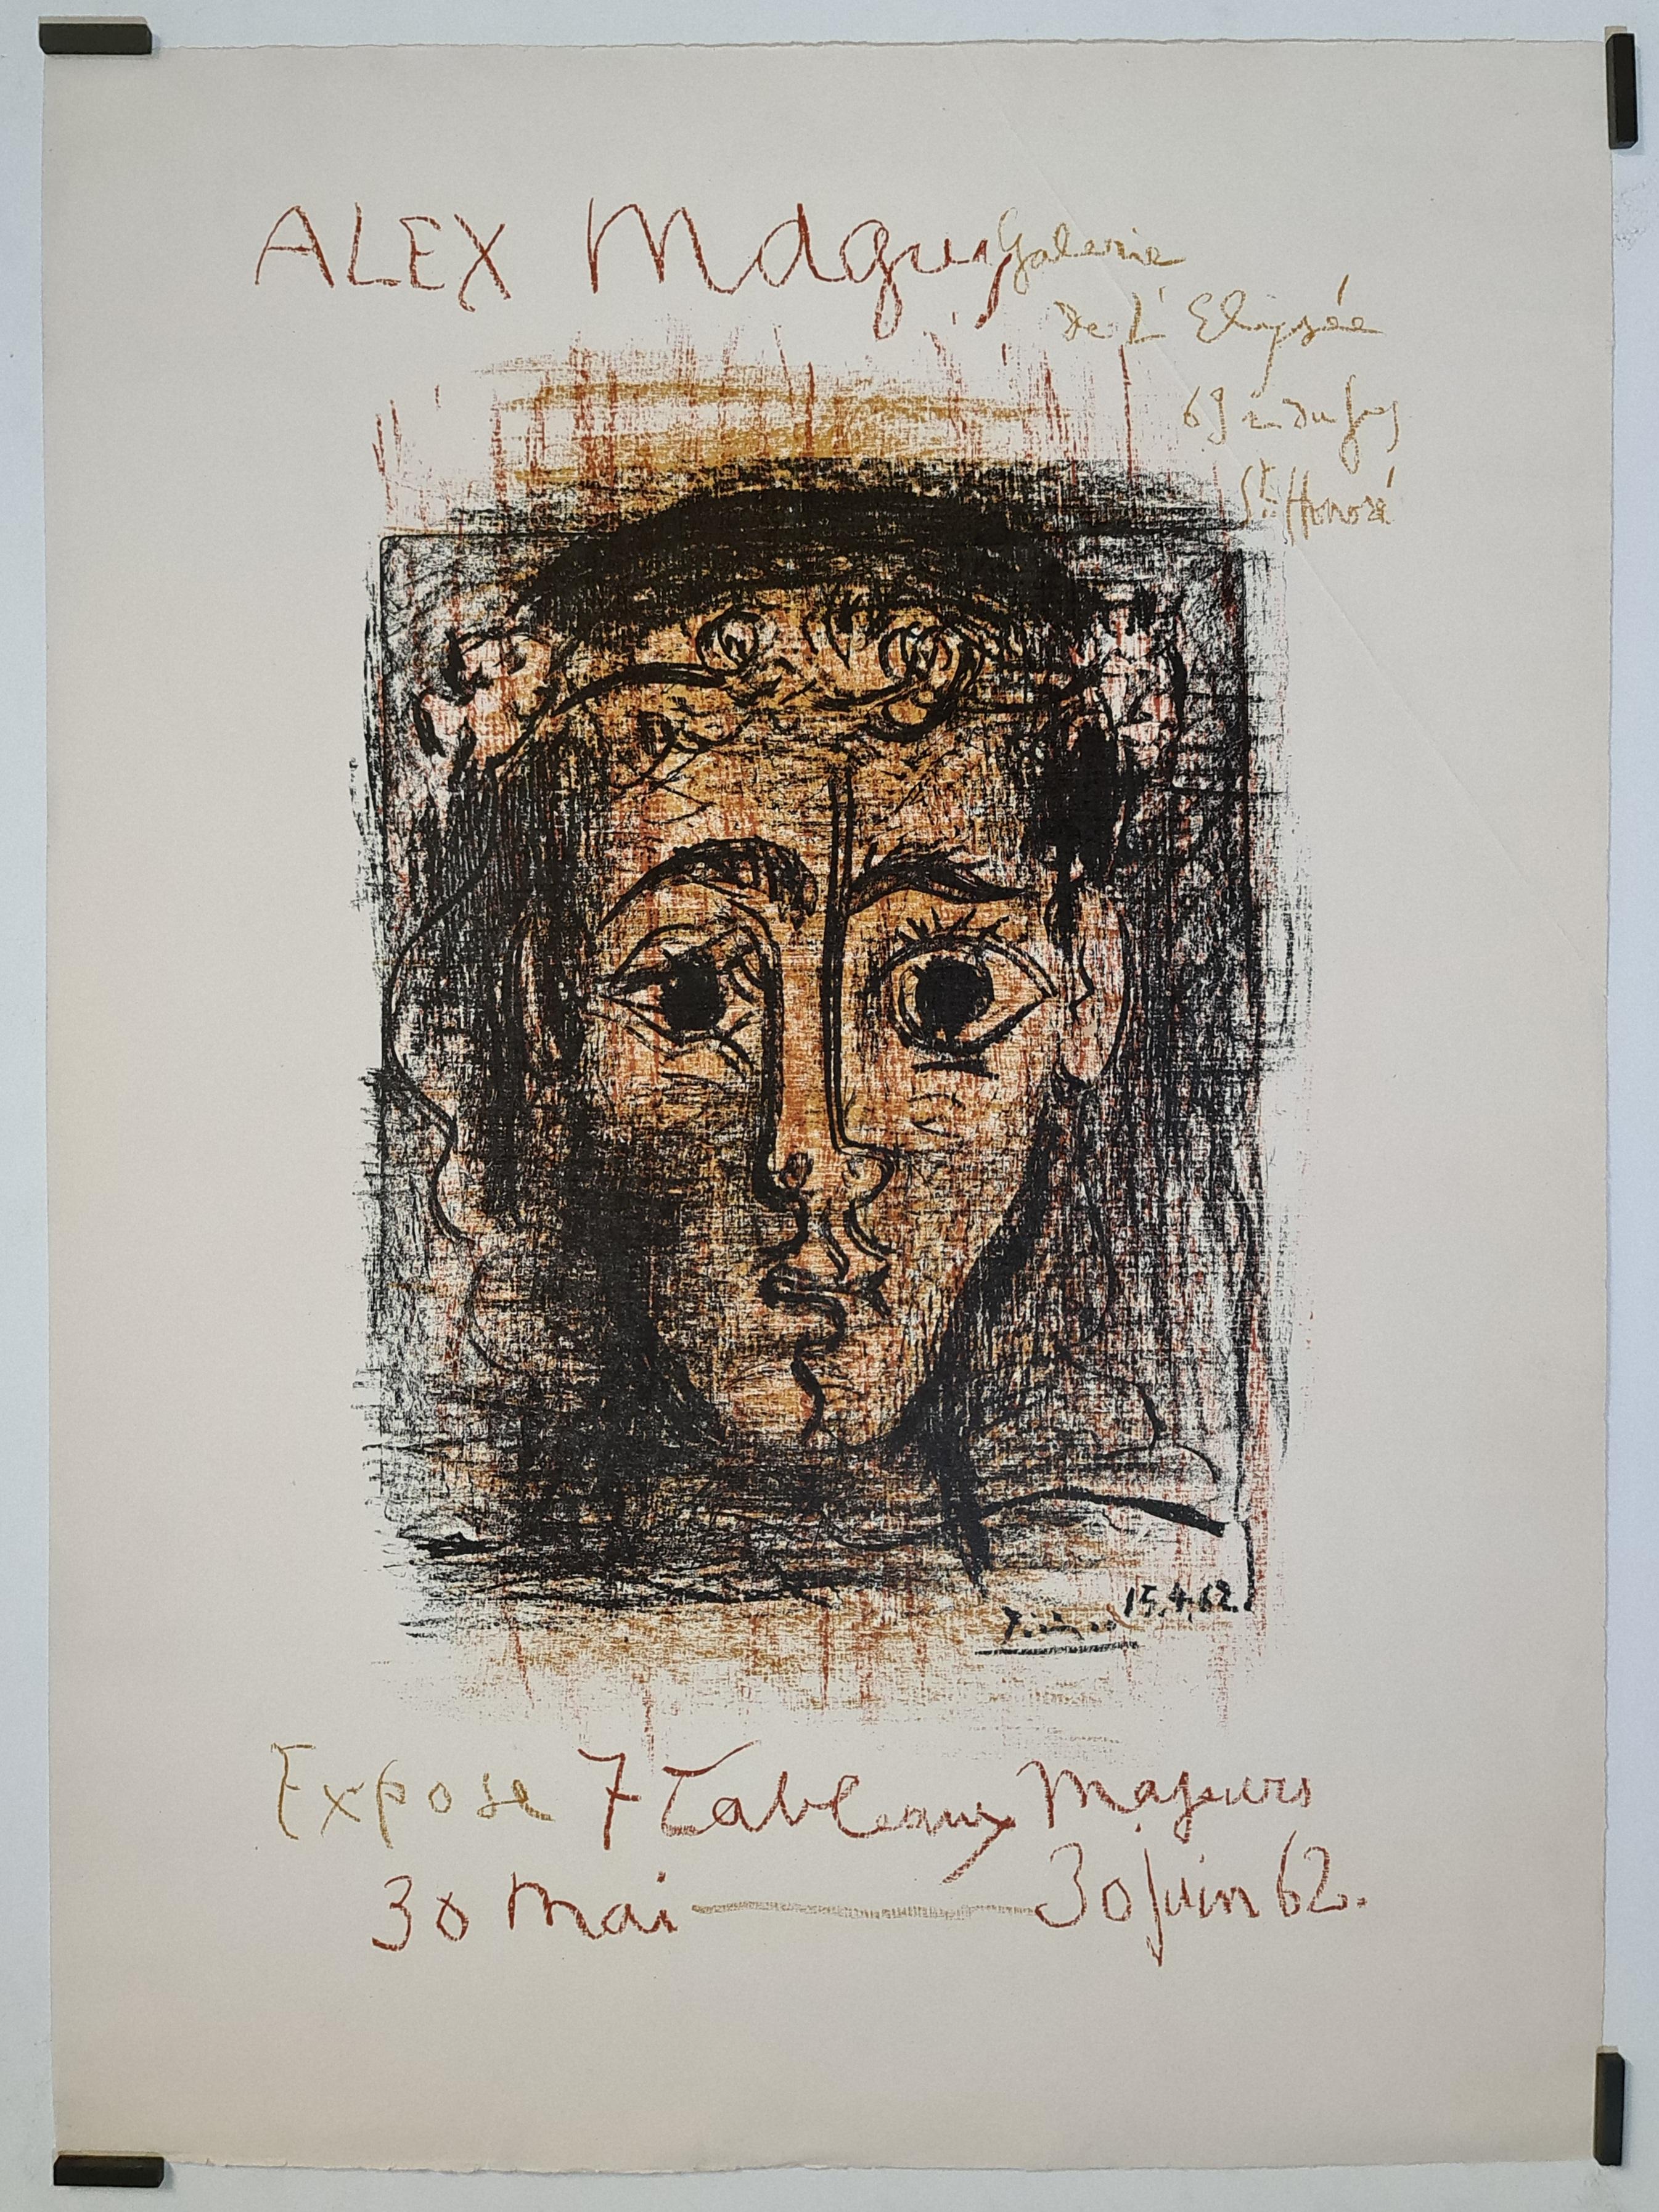 Original poster of Pablo Picasso ( 1881- 1973 ) for an exhibition at the Galerie de l'Élysée.
Pablo Picasso is one of the most prolific and revolutionary artists the world has ever known. He has had a tremendous impact on the development of modern